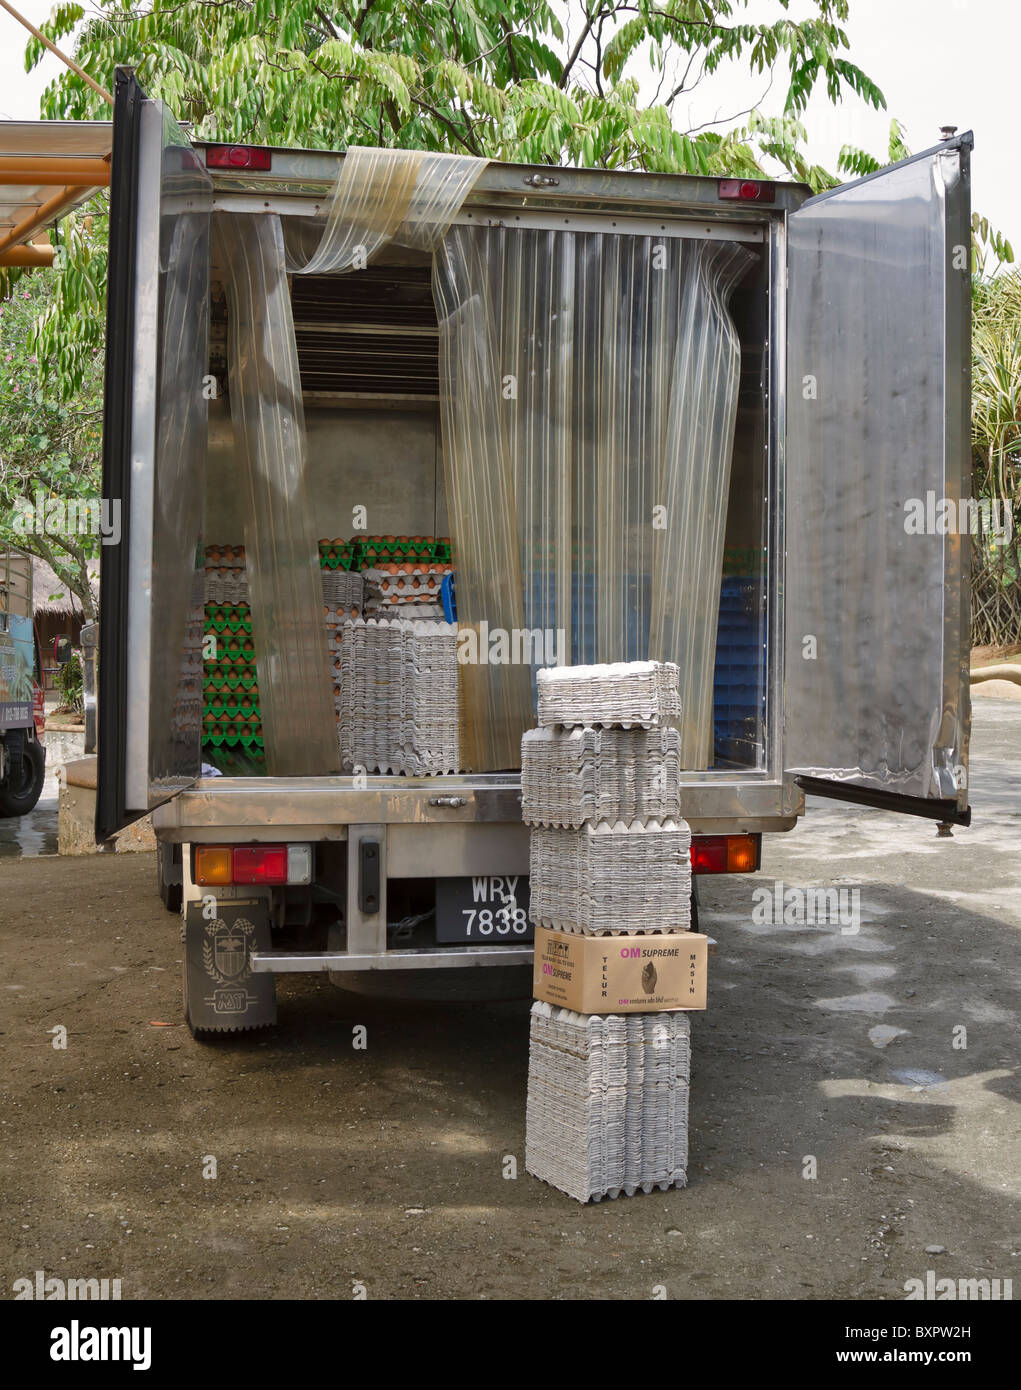 Eggs in the back of a delivery truck. Brown eggs in paper and plastic trays are stacked in the back of the lorry Stock Photo